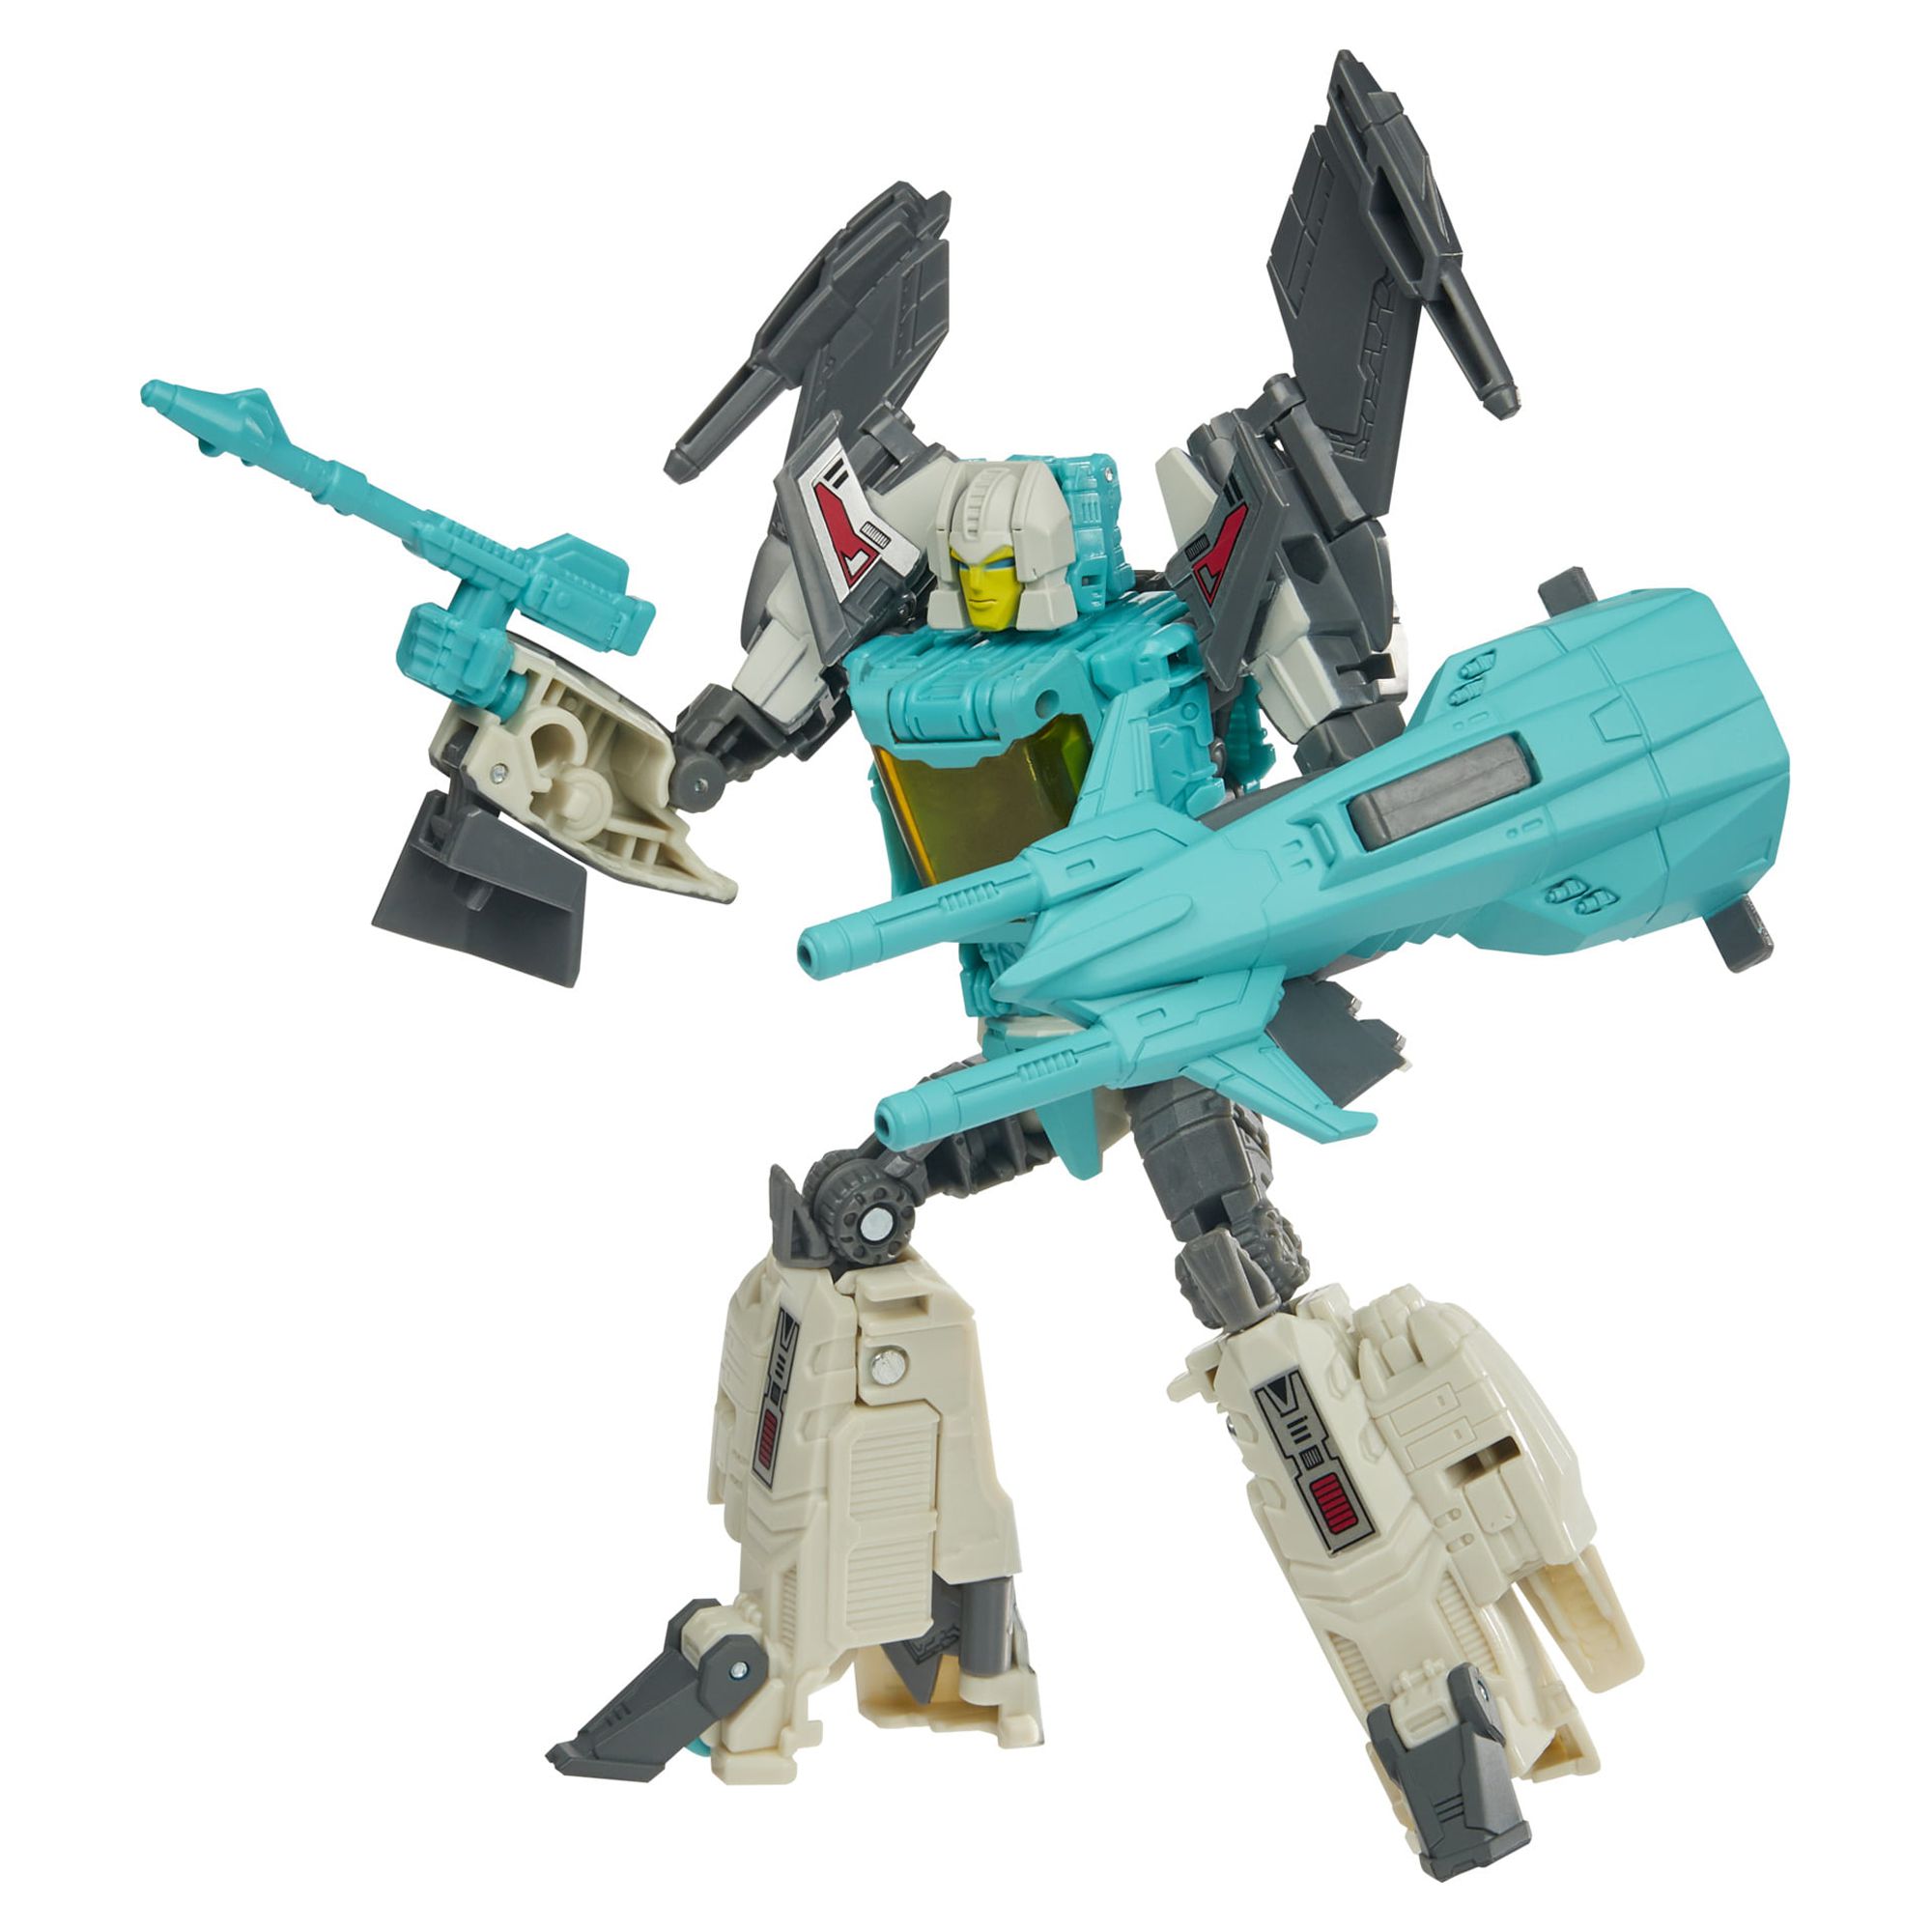 Transformers: Headmaster Autobot Brainstorm Kids Toy Action Figure for Boys and Girls (3”) - image 4 of 9